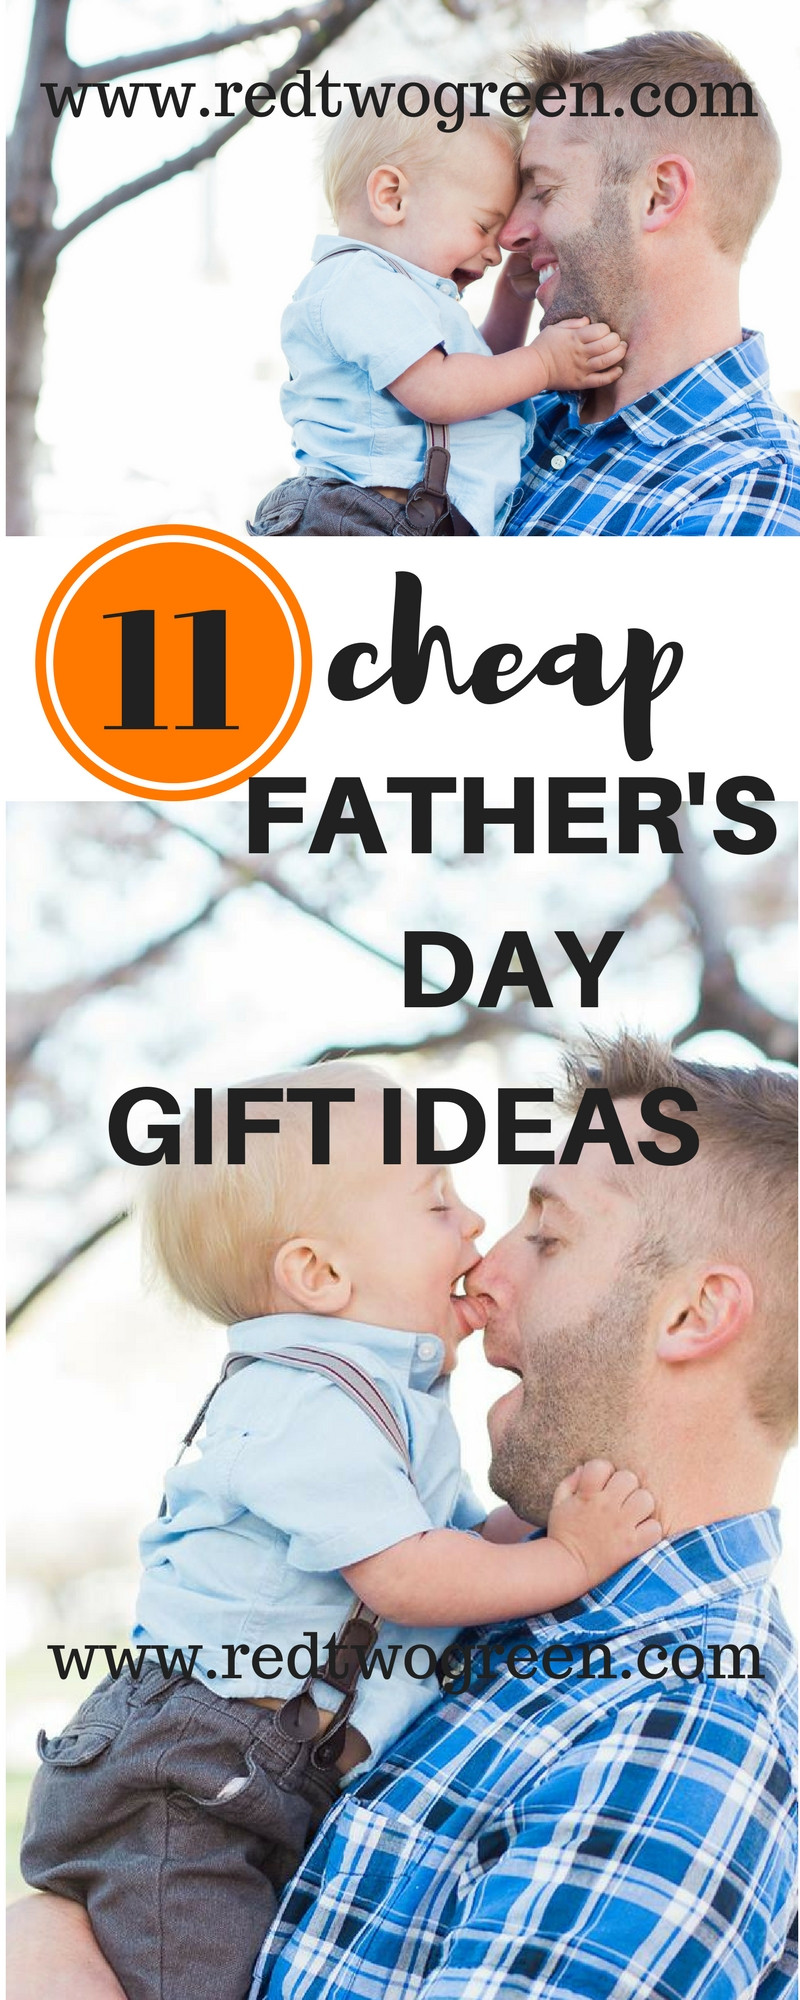 Inexpensive Mother'S Day Gift Ideas
 11 CHEAP FATHER S DAY GIFT IDEAS – R E D T W O G R E E N